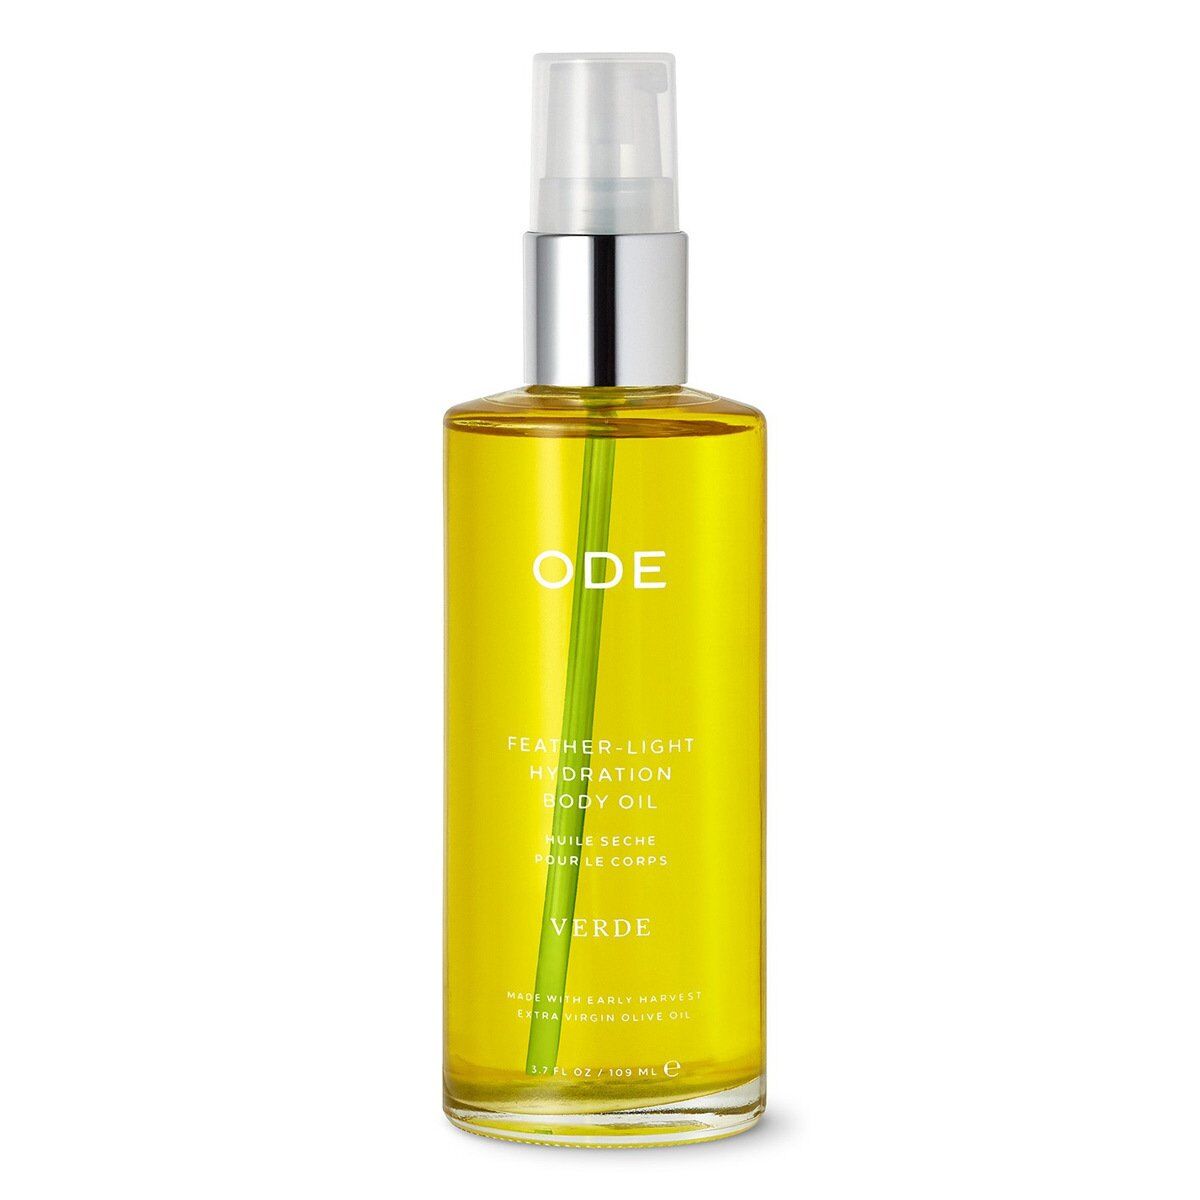 ODE - Verde Feather-Light Hydration Body Oil